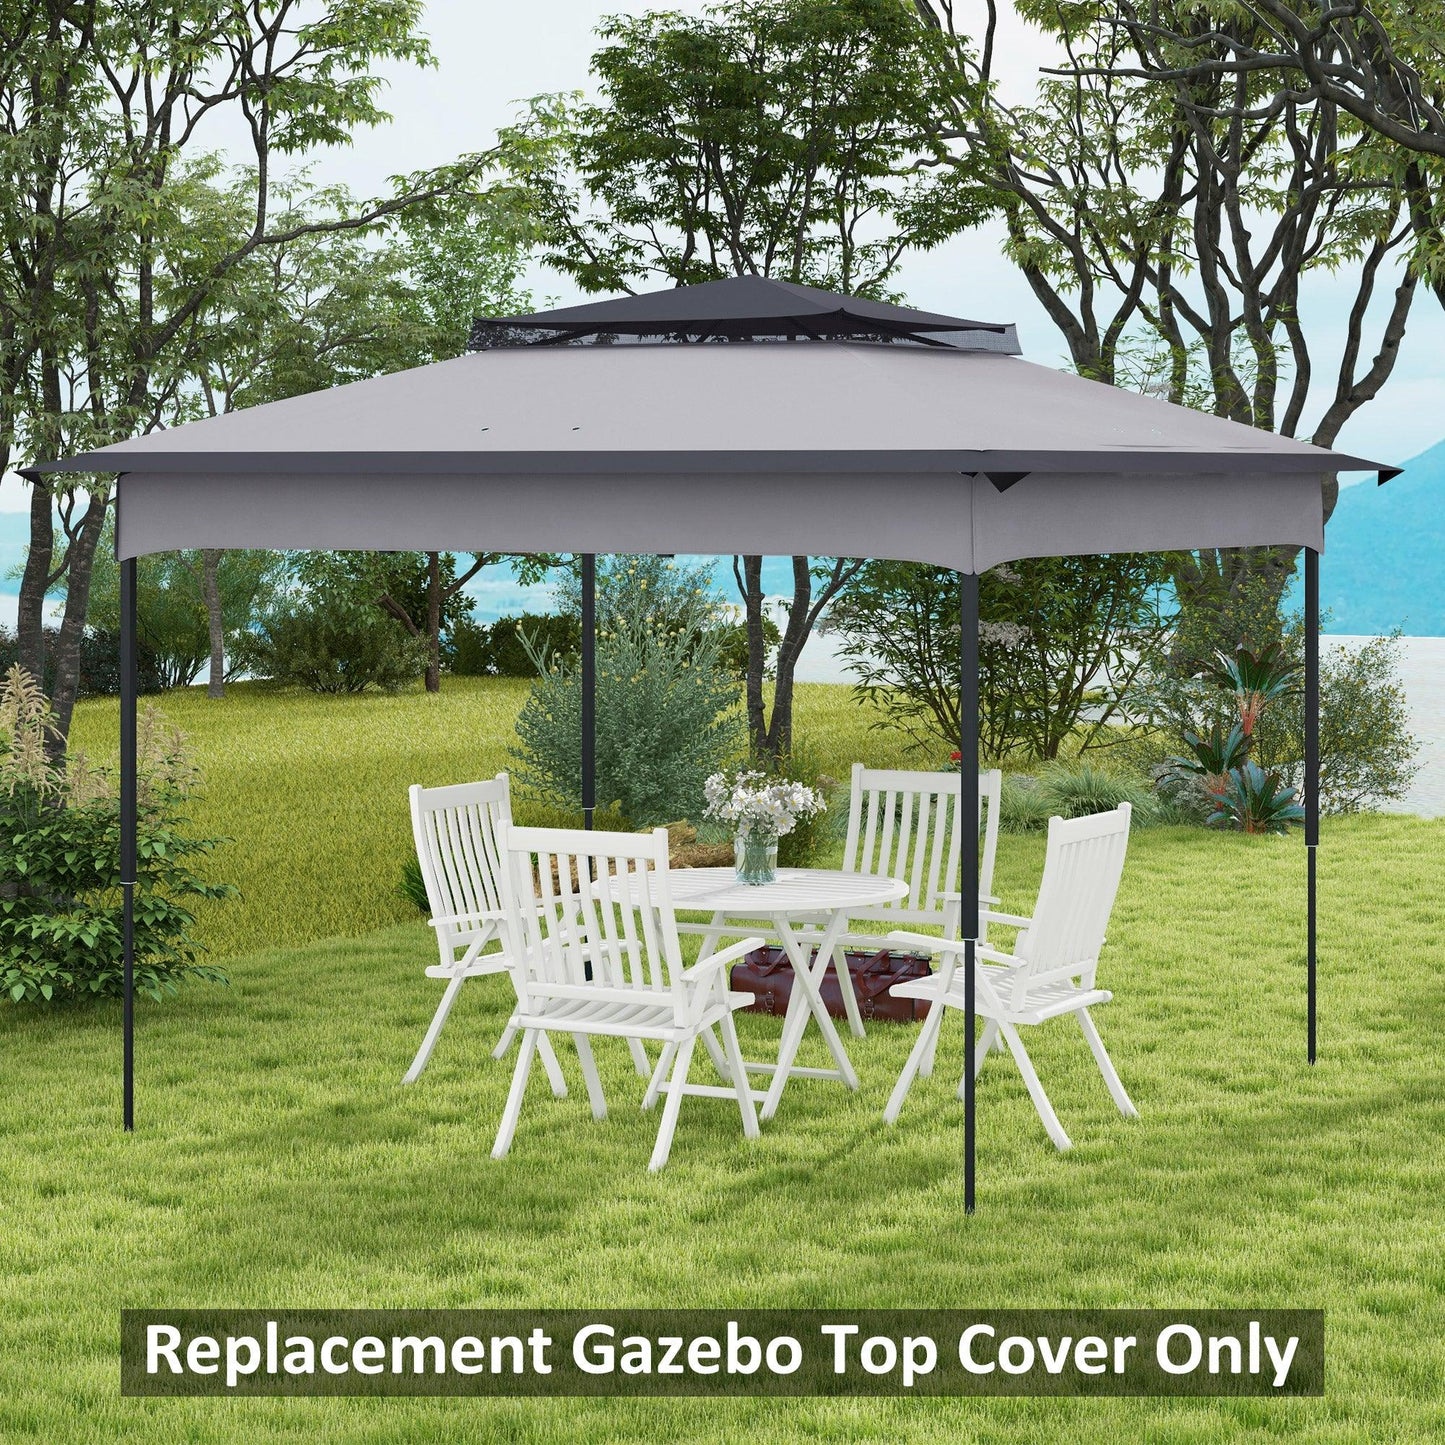 Outsunny Pop up Gazebo Cover, 2-Tier Gazebo Roof Replacement for 3.25m x 3.25m Frame, 30+ UV Protection, Grey - ALL4U RETAILER LTD